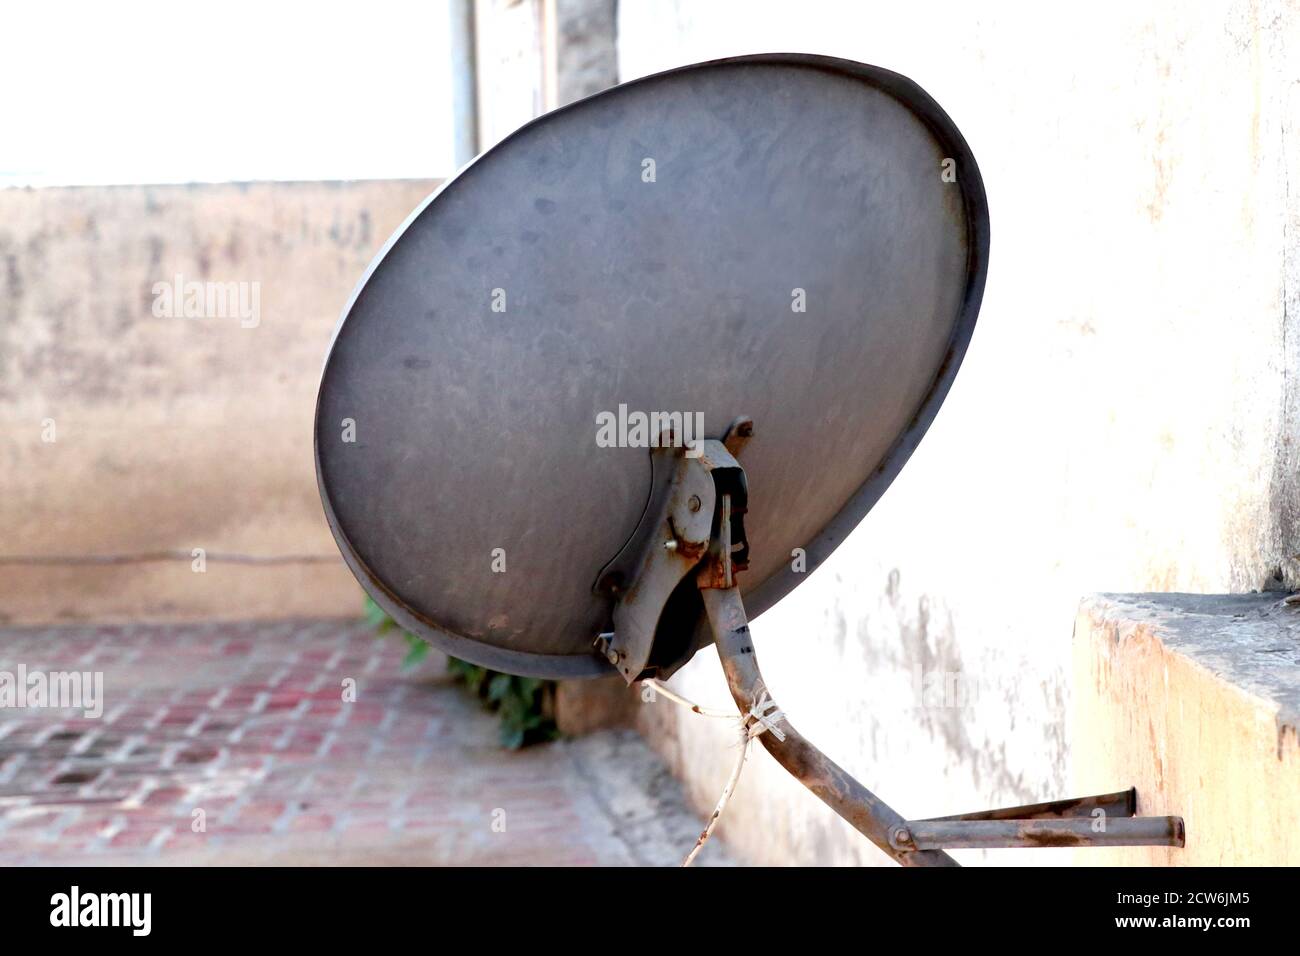 An old rusty television antenna image, satellite dish image Stock Photo